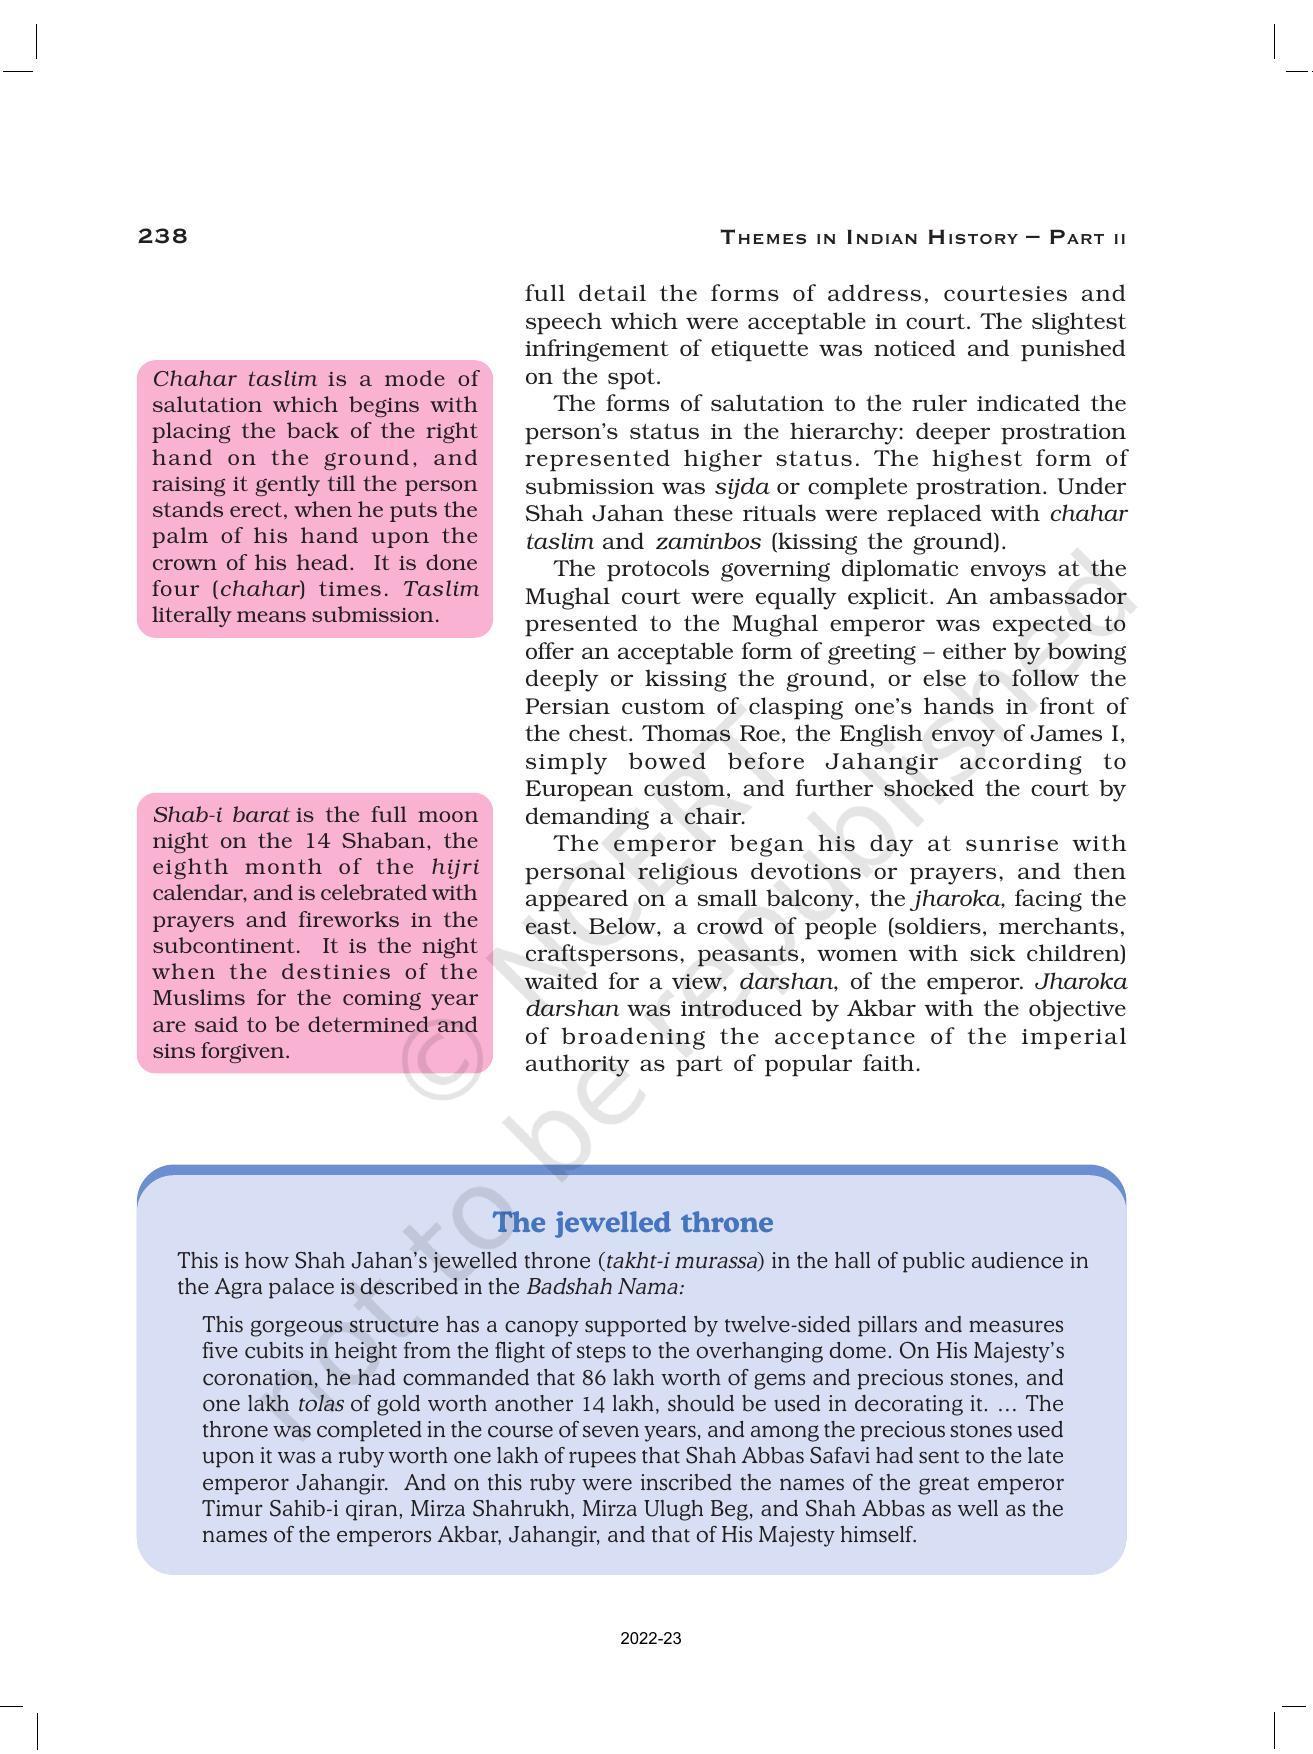 NCERT Book for Class 12 History (Part-II) Chapter 9 Kings and Chronicles - Page 15